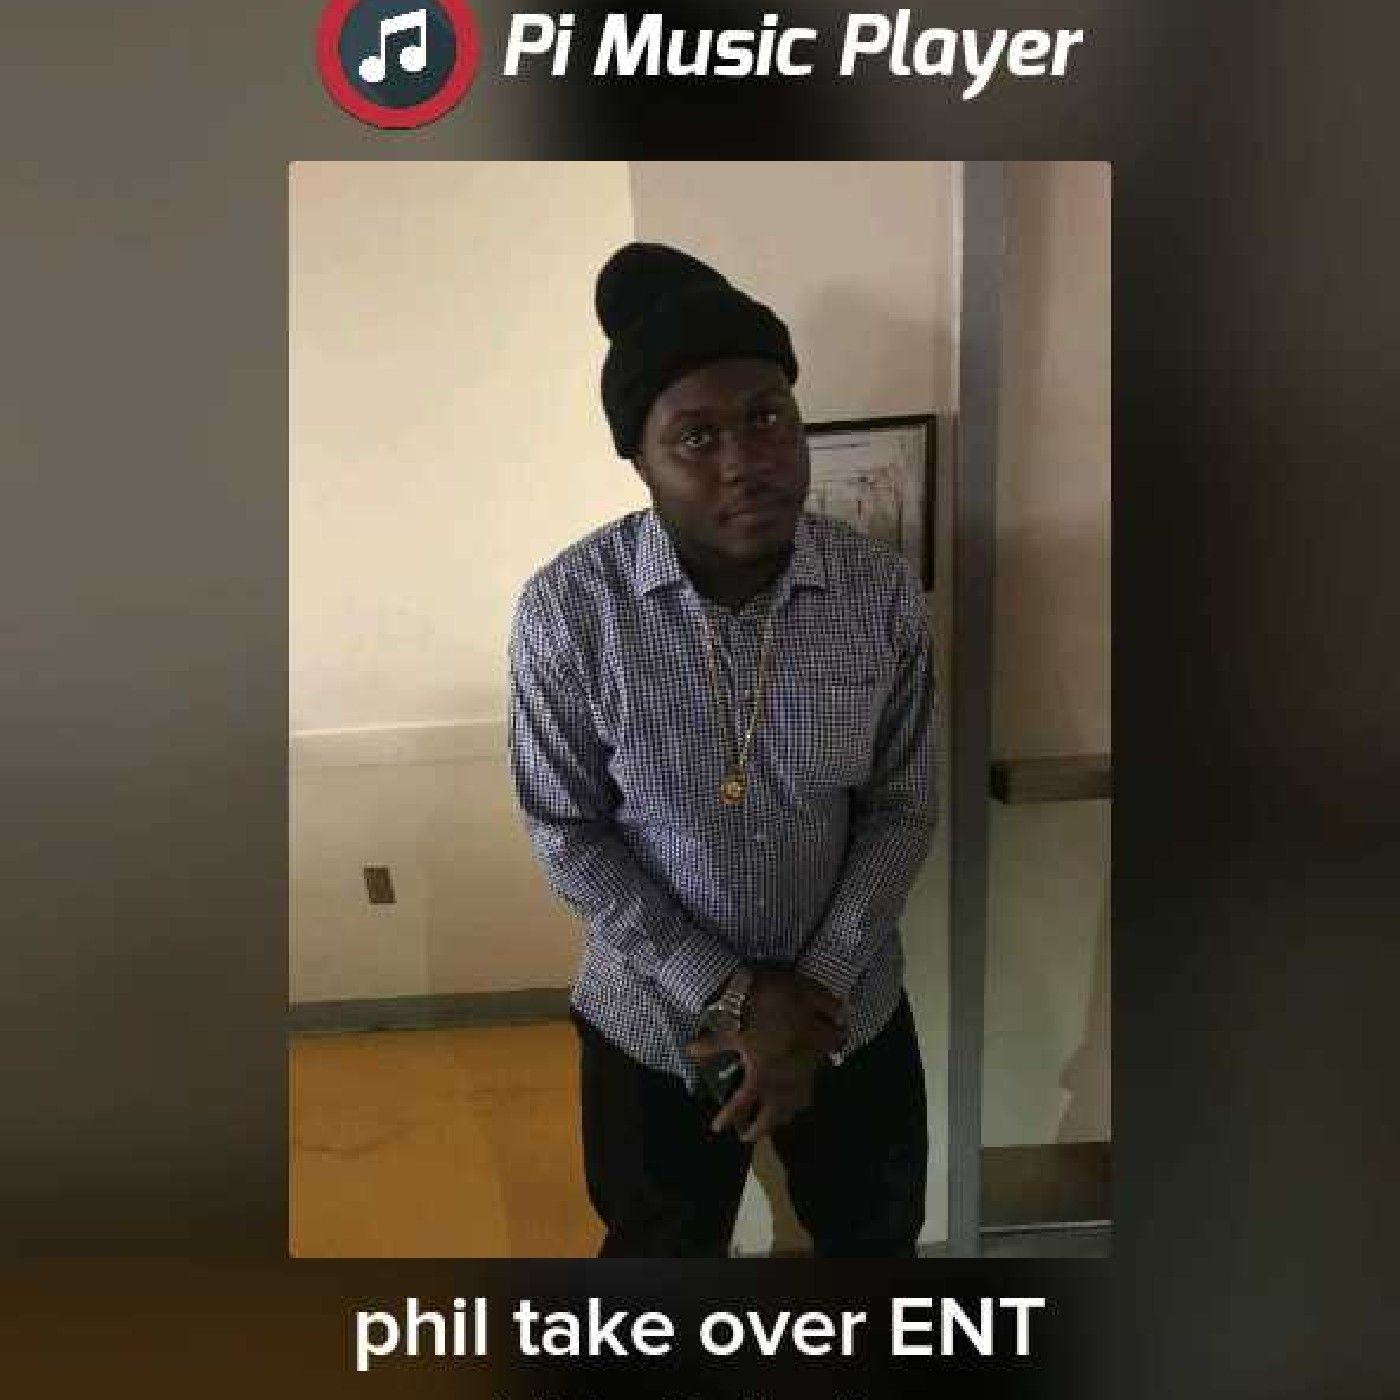 Episode 1 - Phil takeover ENT